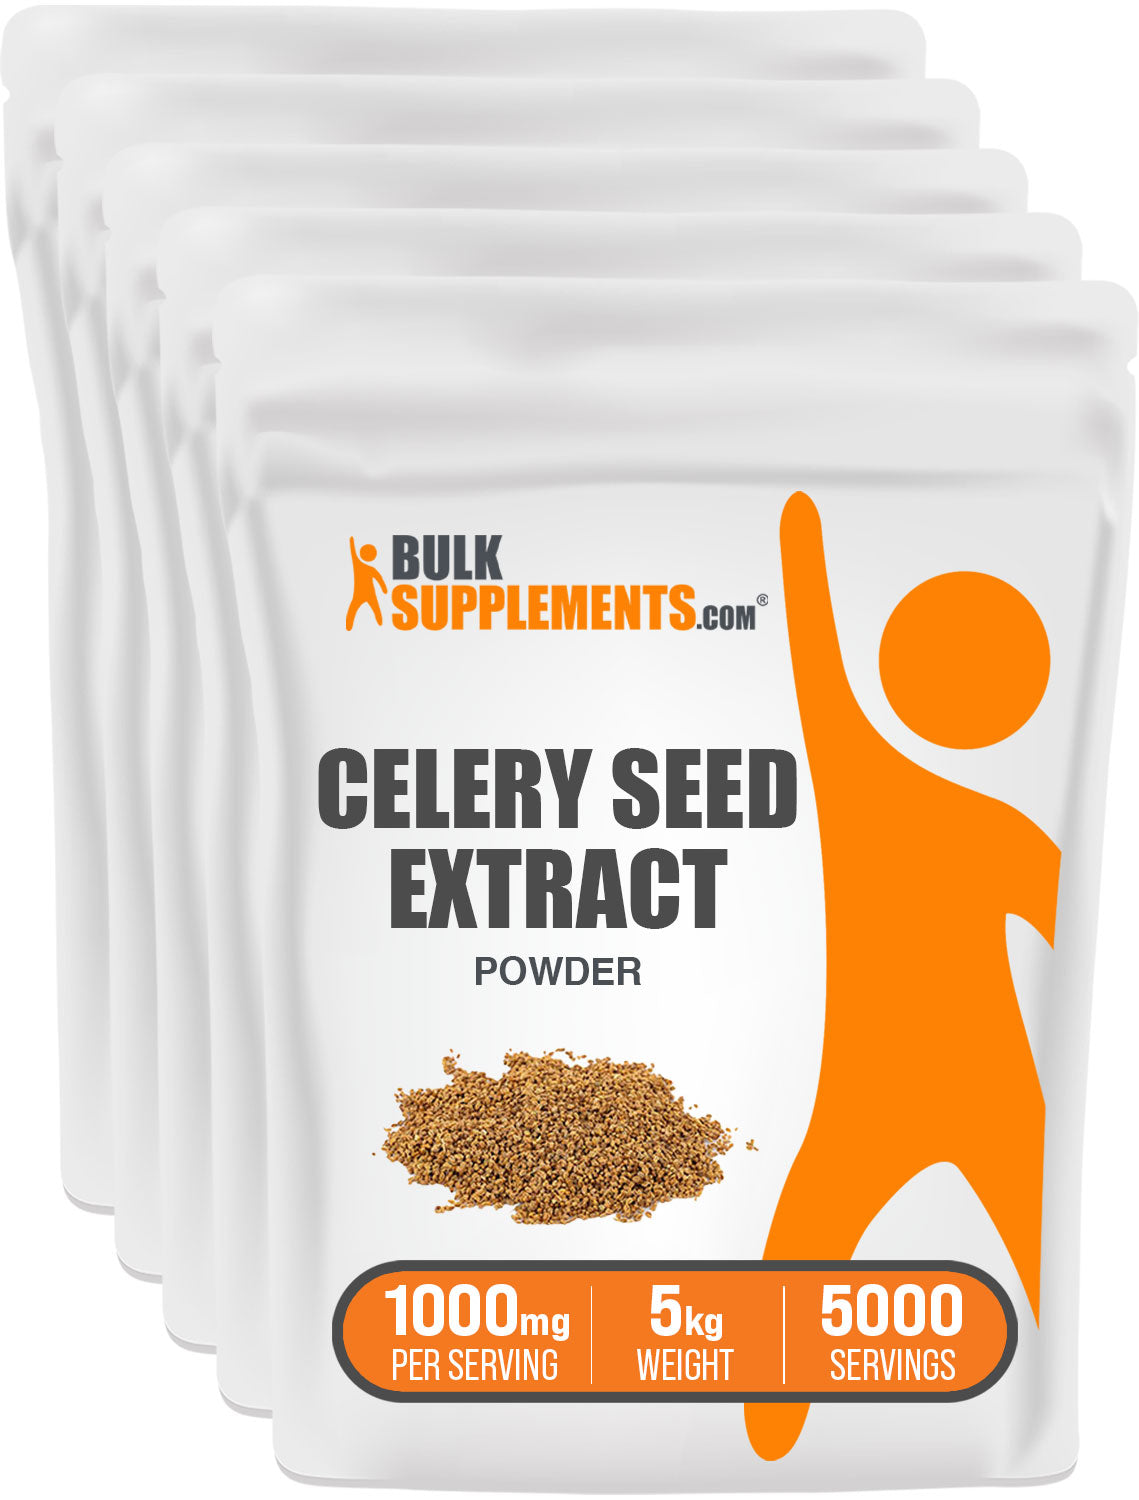 5kg celery seed extract